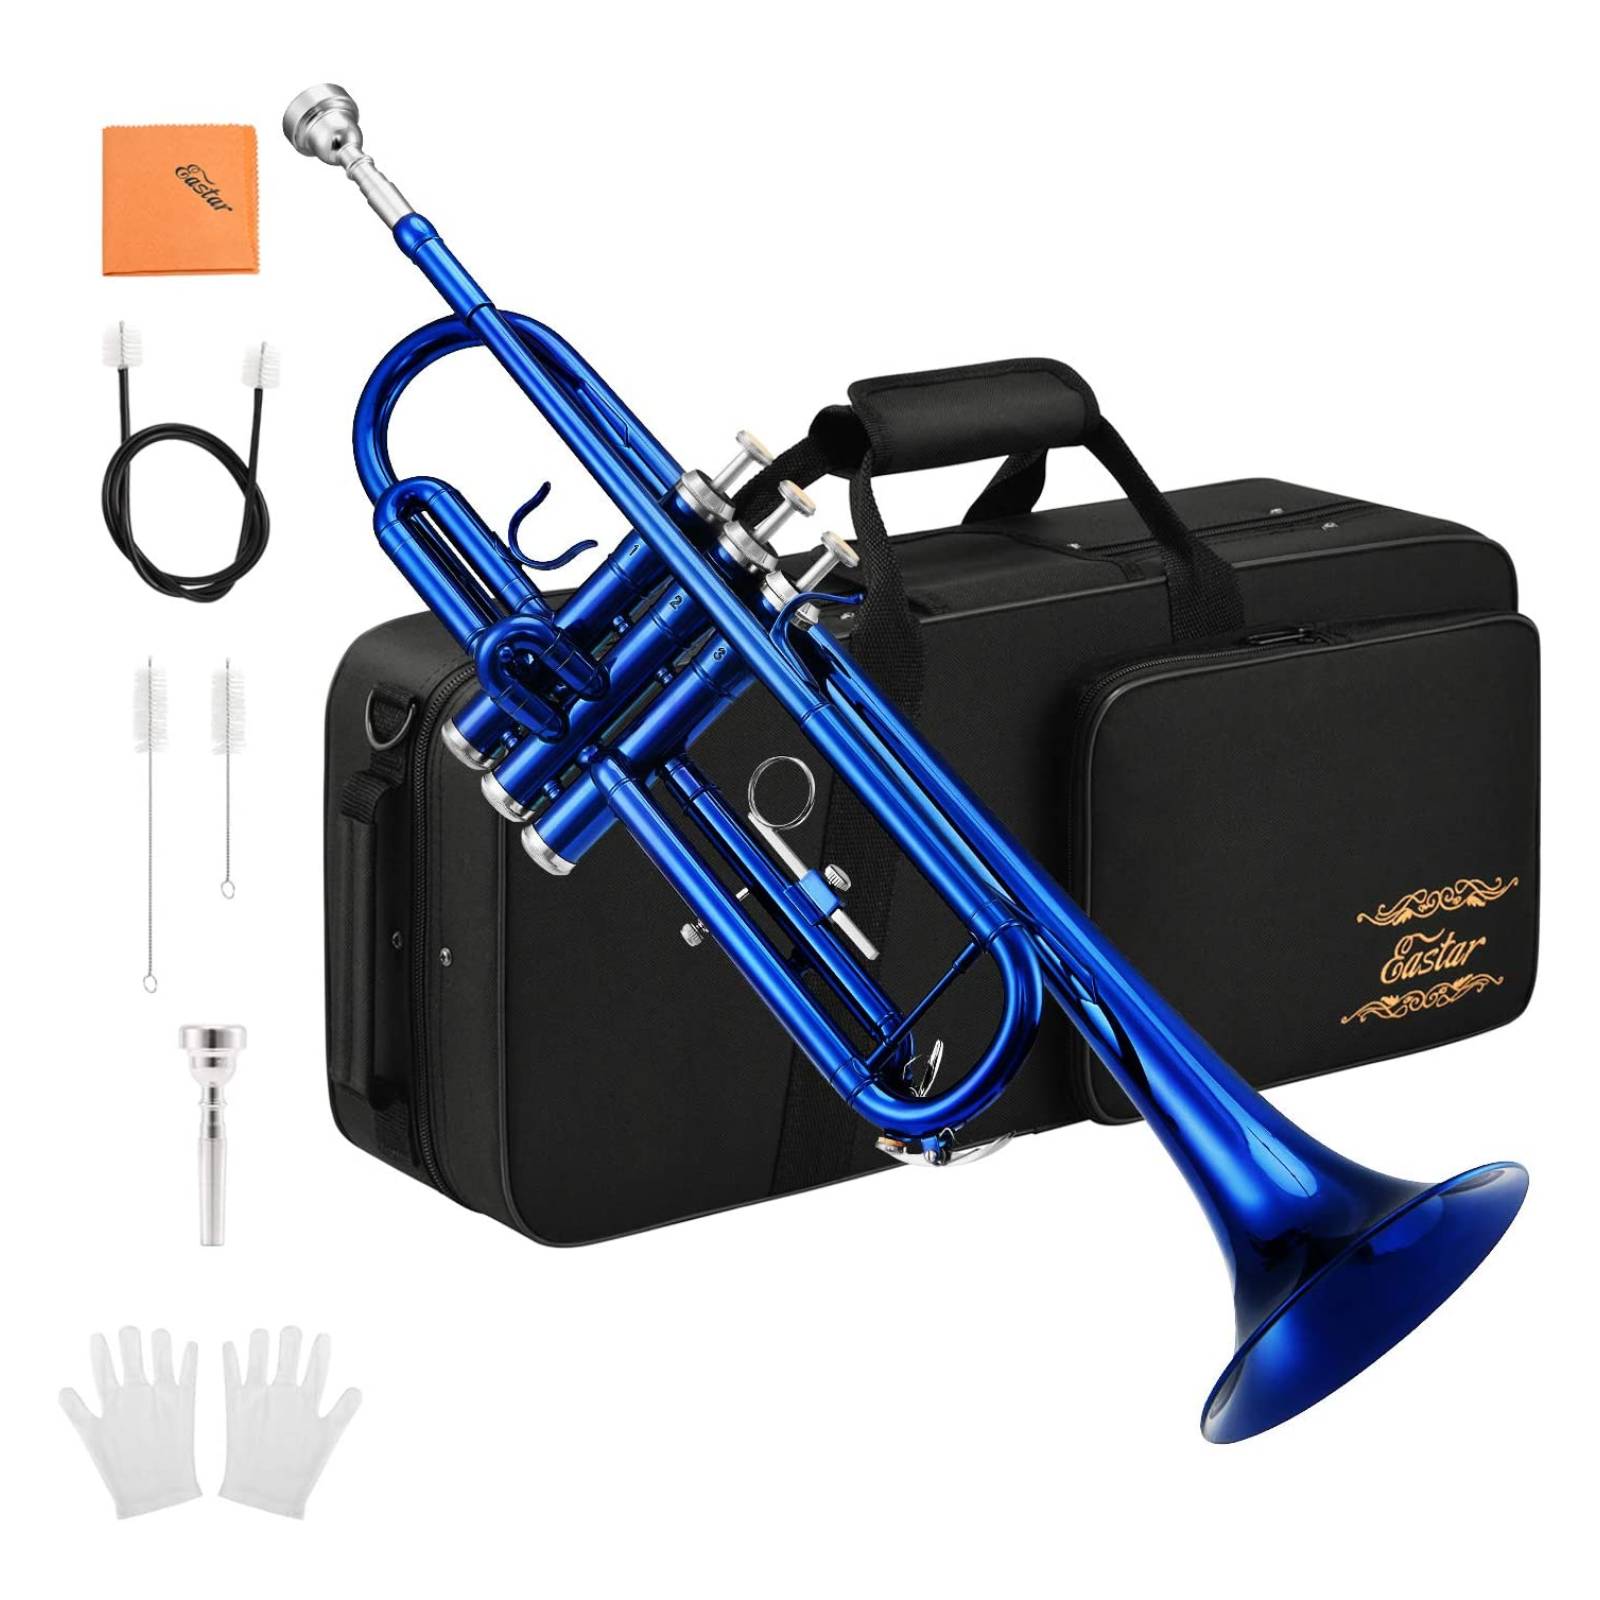 

Eastar ETR-380BU Standard Blue Bb Trumpet Set with Hard Case/Cleaning Kit/7C Mouthpiece and Gloves